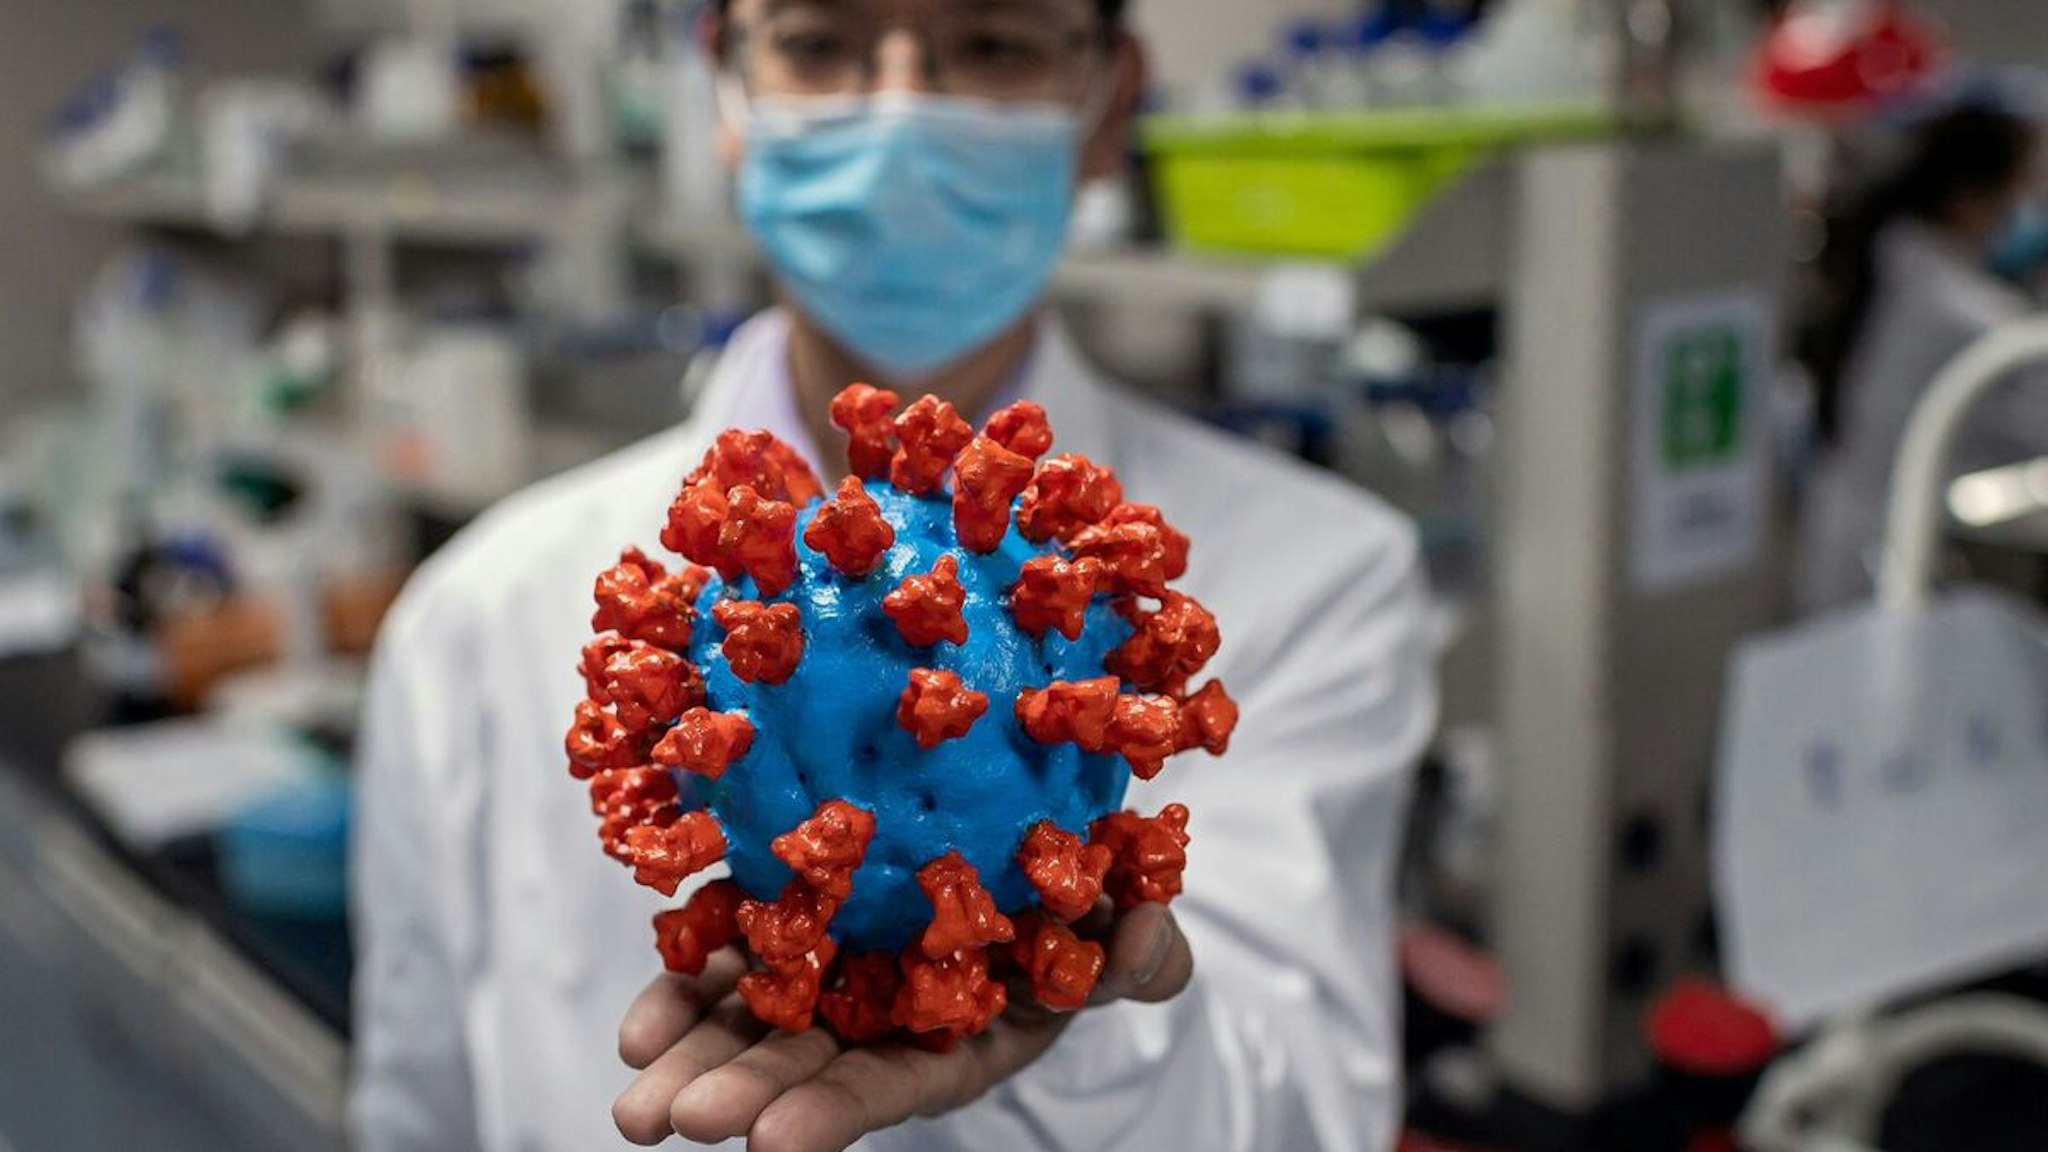 TOPSHOT - In this picture taken on April 29, 2020, an engineer shows a plastic model of the COVID-19 coronavirus at the Quality Control Laboratory at the Sinovac Biotech facilities in Beijing. - Sinovac Biotech, which is conducting one of the four clinical trials that have been authorised in China, has claimed great progress in its research and promising results among monkeys. (Photo by NICOLAS ASFOURI / AFP) / TO GO WITH Health-virus-China-vaccine,FOCUS by Patrick Baert